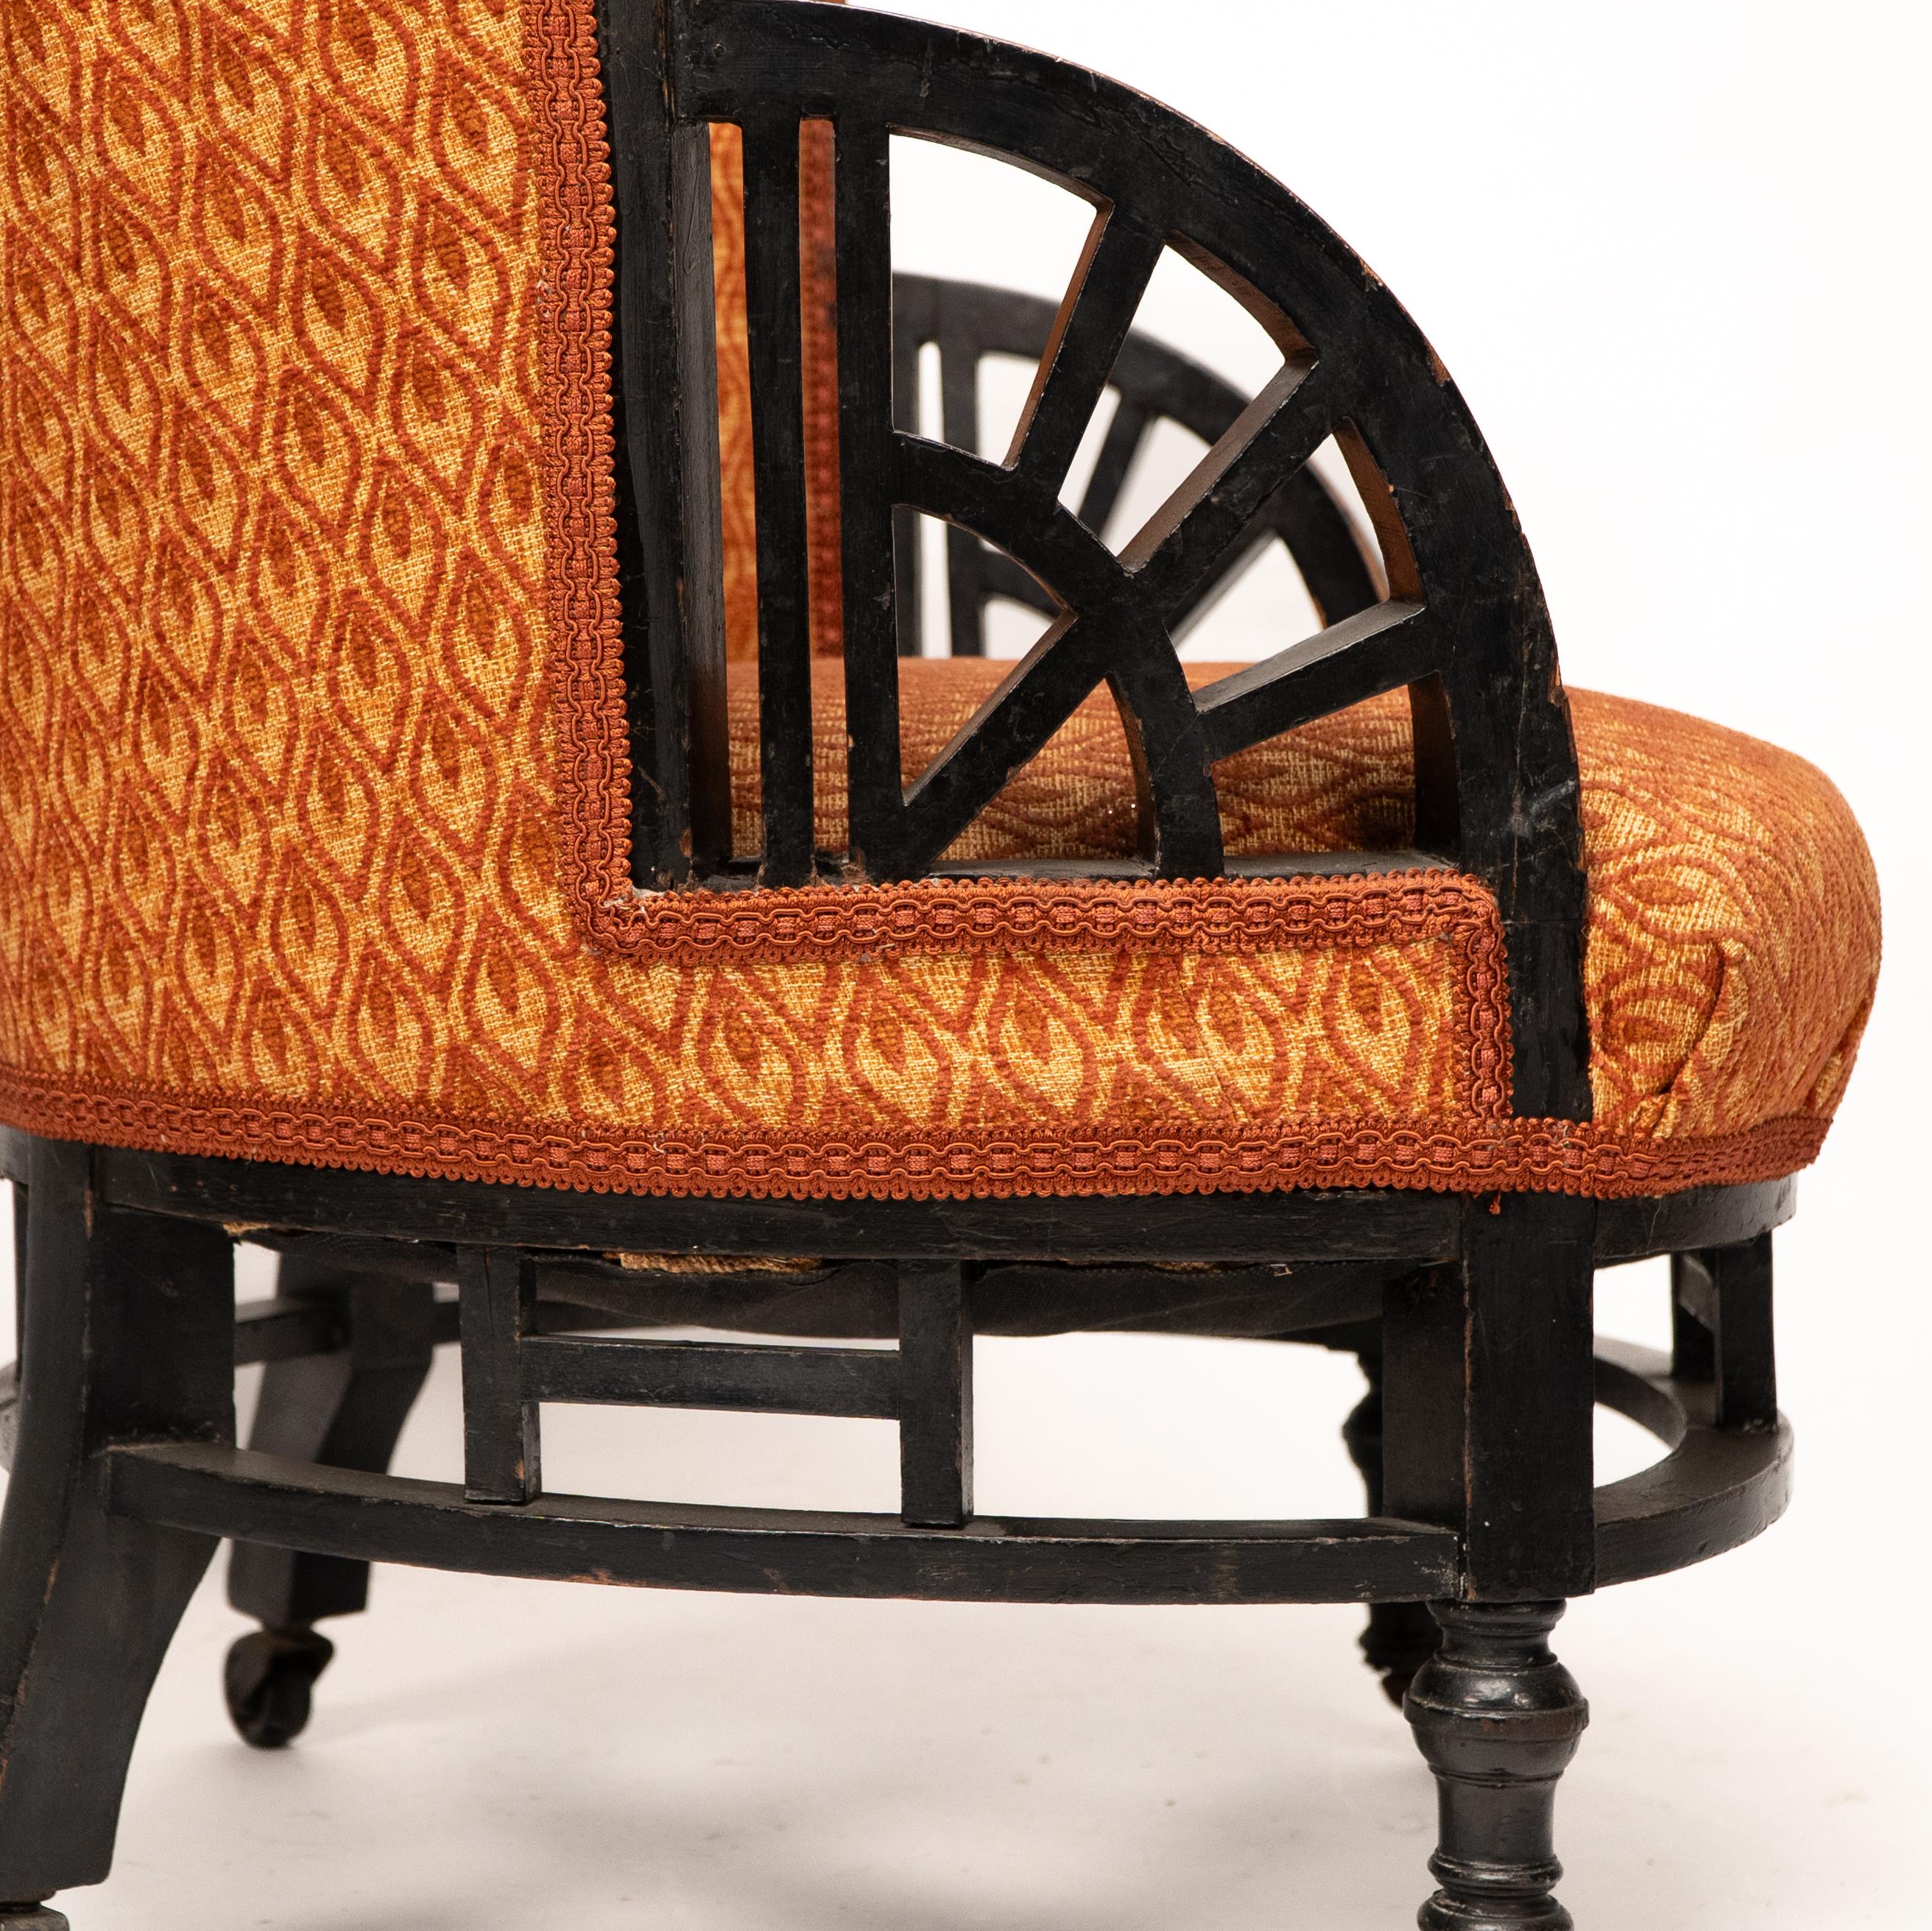 E W Godwin attri. An Anglo-Japanese circular armchair with fan shaped arms For Sale 5